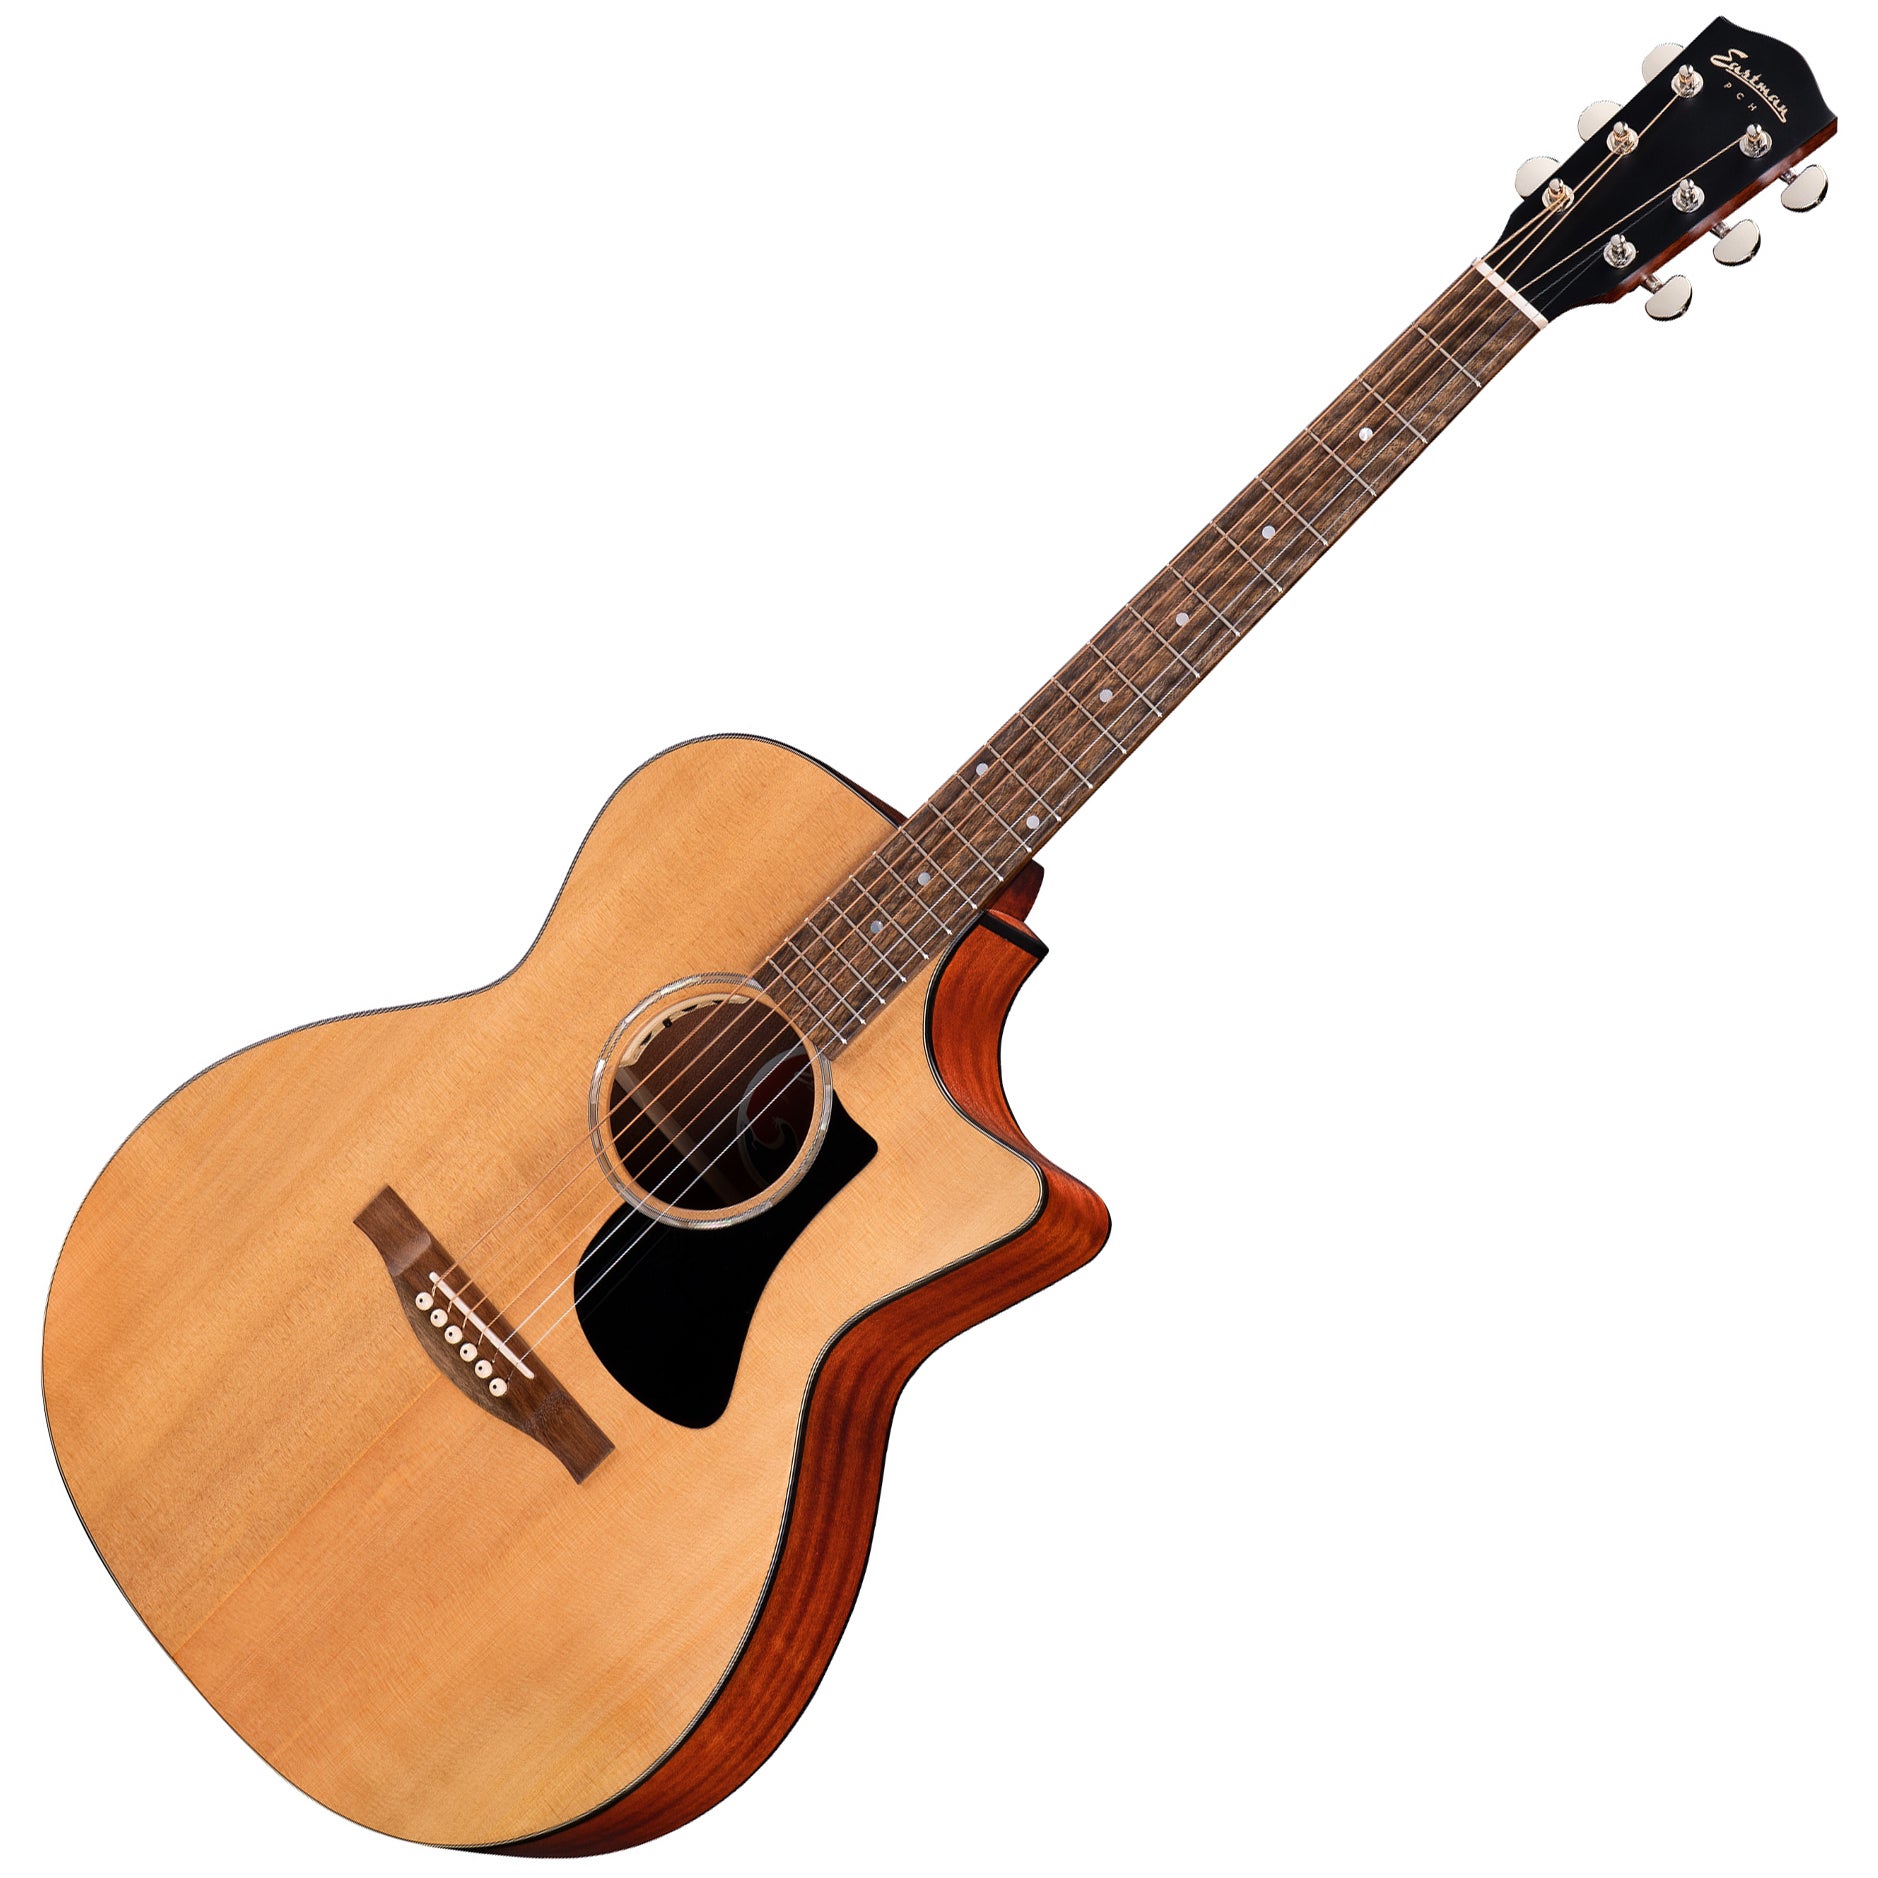 Eastman Pch1-gace Pacific Coast Highway Series Acoustic-electric Guitar -  Thermo-cure Natural | Music Works